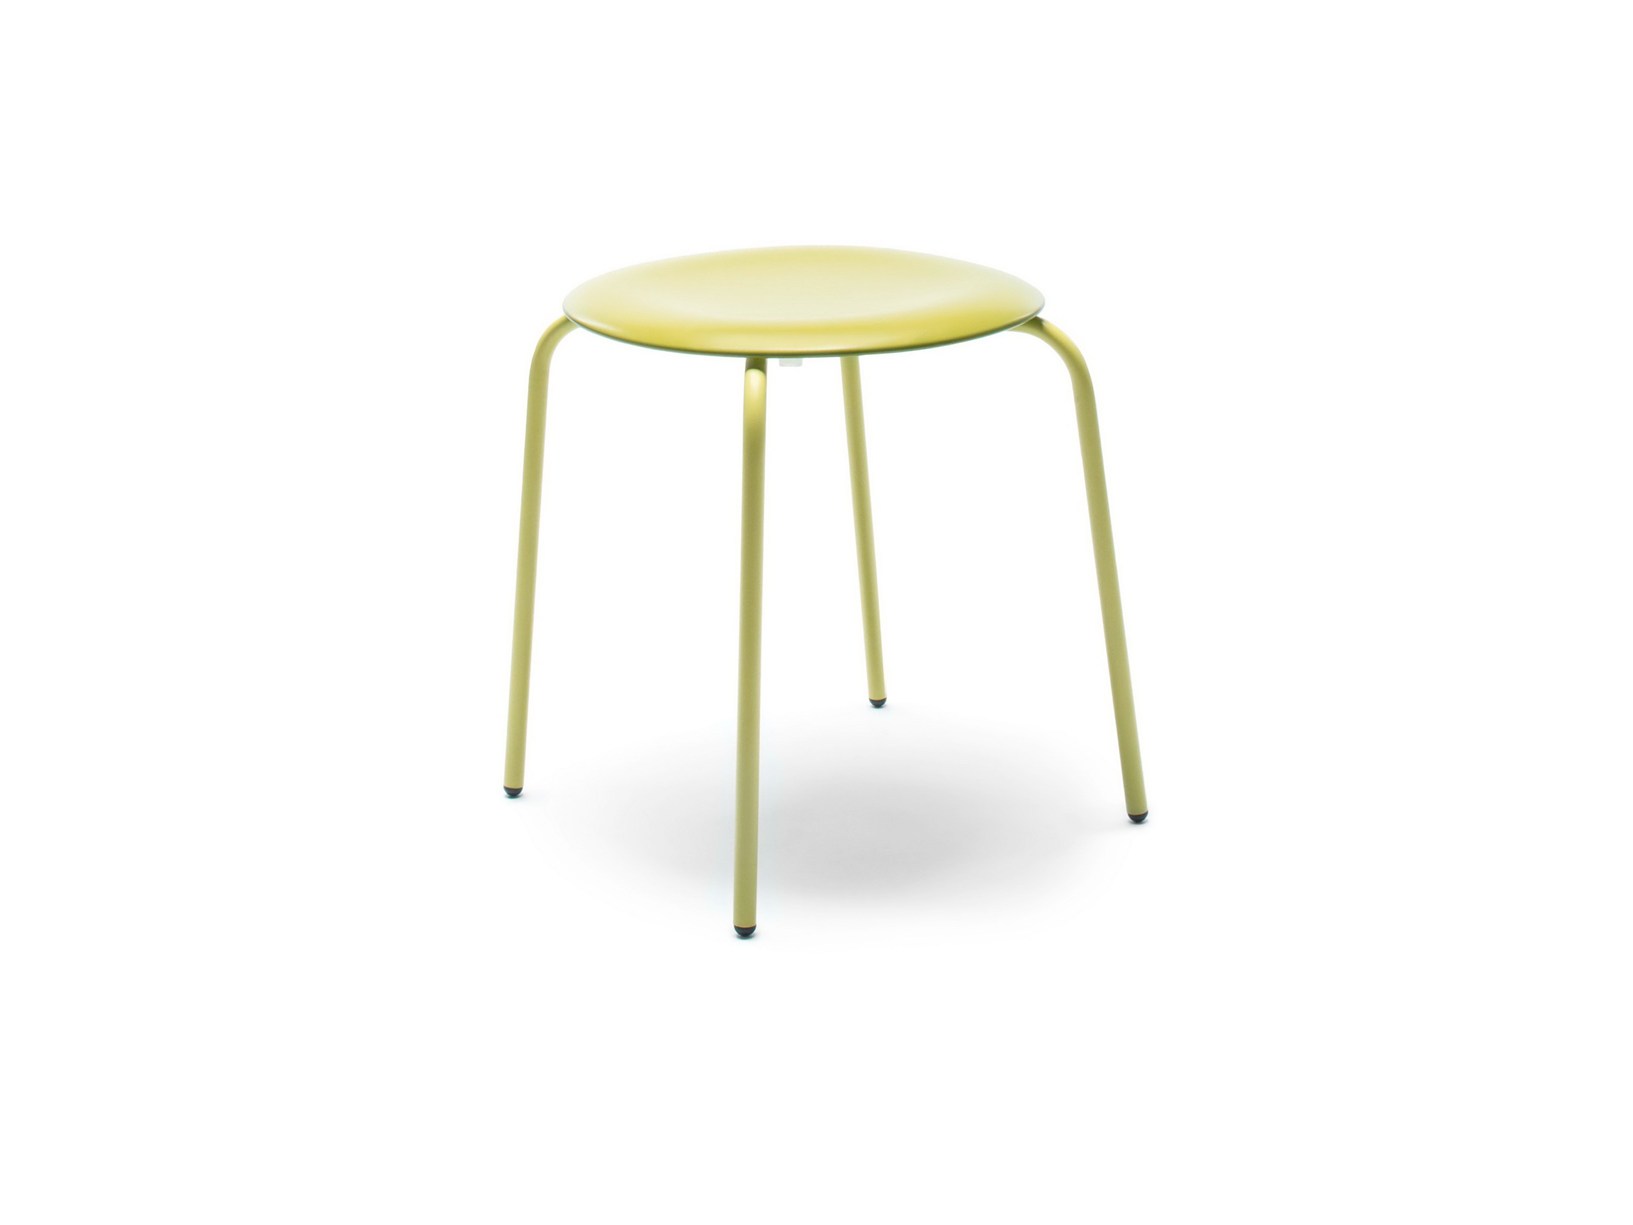 PRO STOOL Collection 2016 by Konstantin Grcic for Flötotto